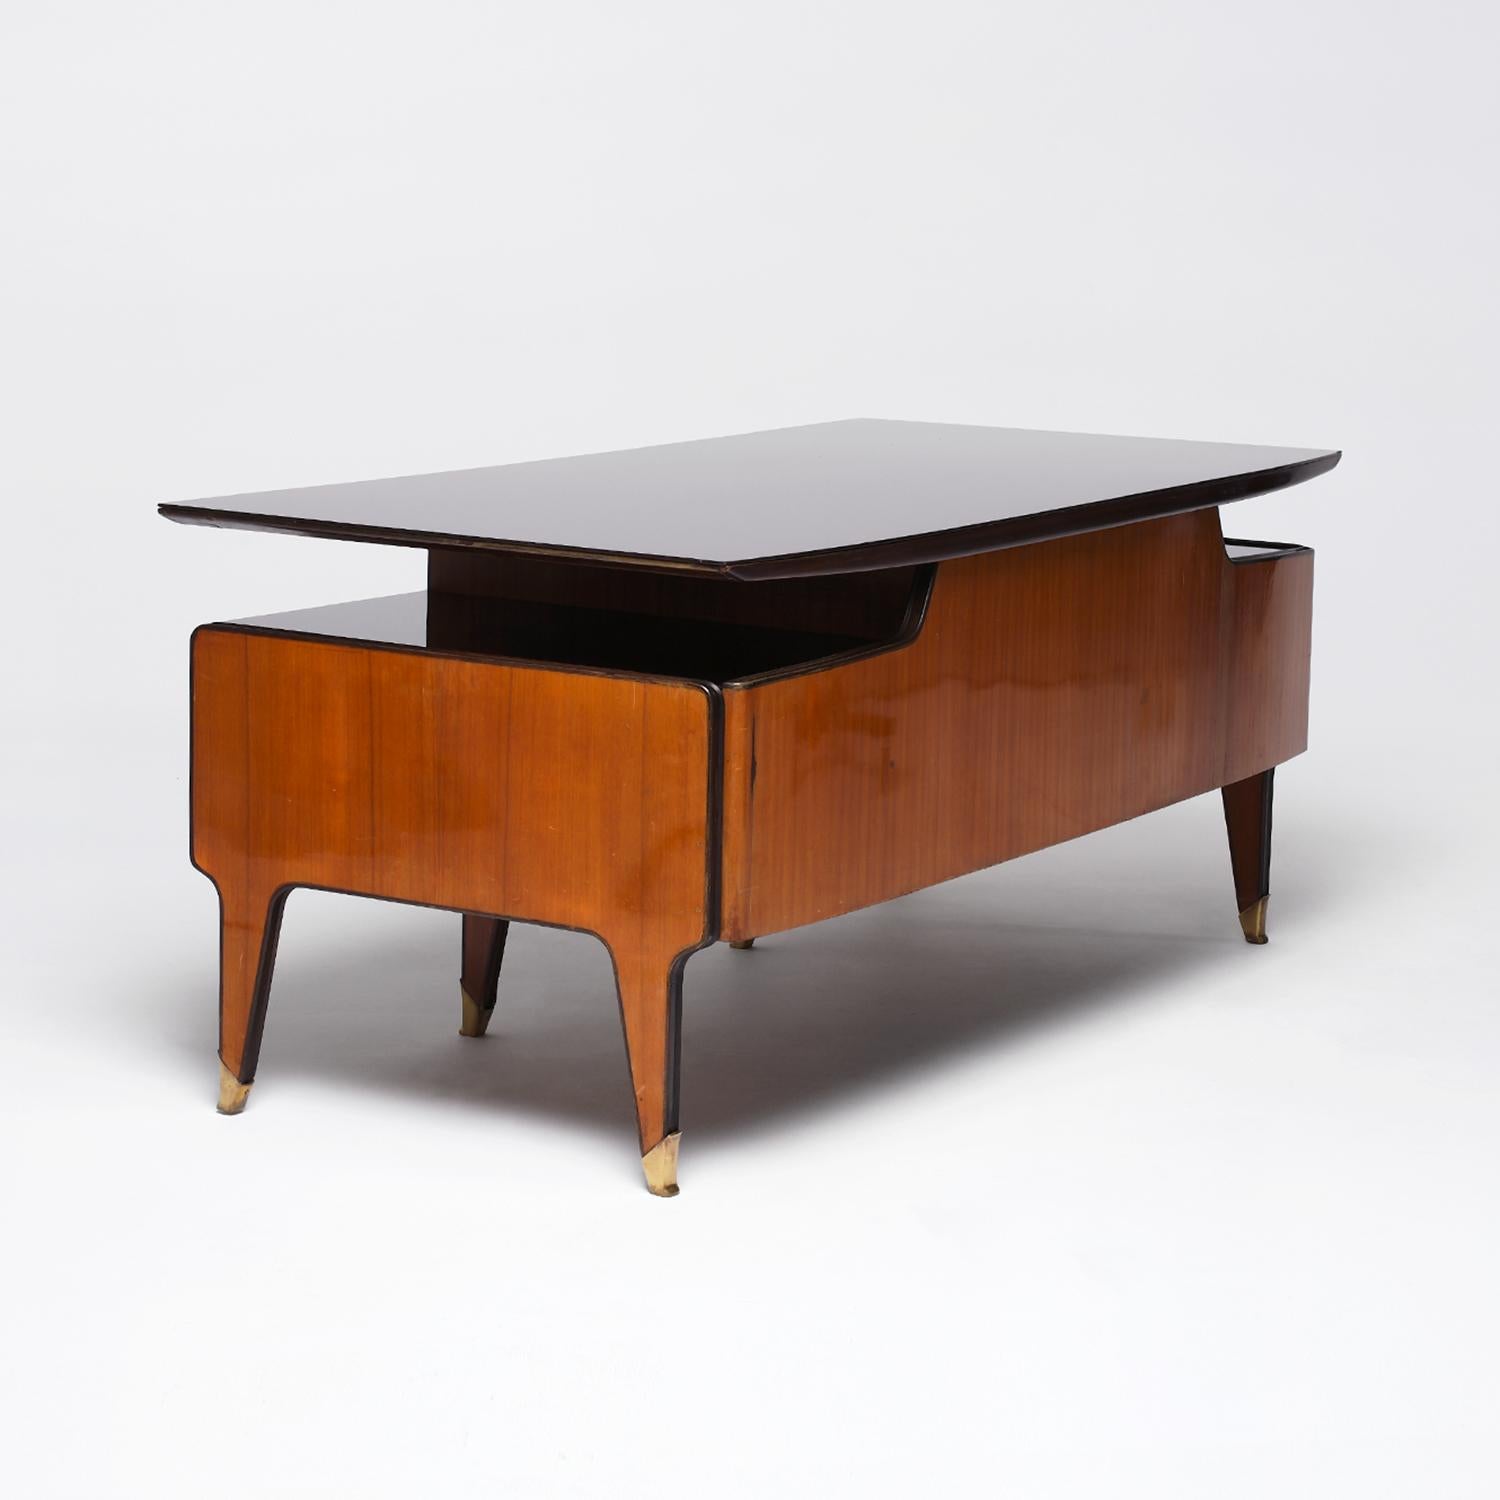 20th Century Italian Mahogany Writing Table - Vintage Desk by Vittorio Dassi In Good Condition For Sale In West Palm Beach, FL